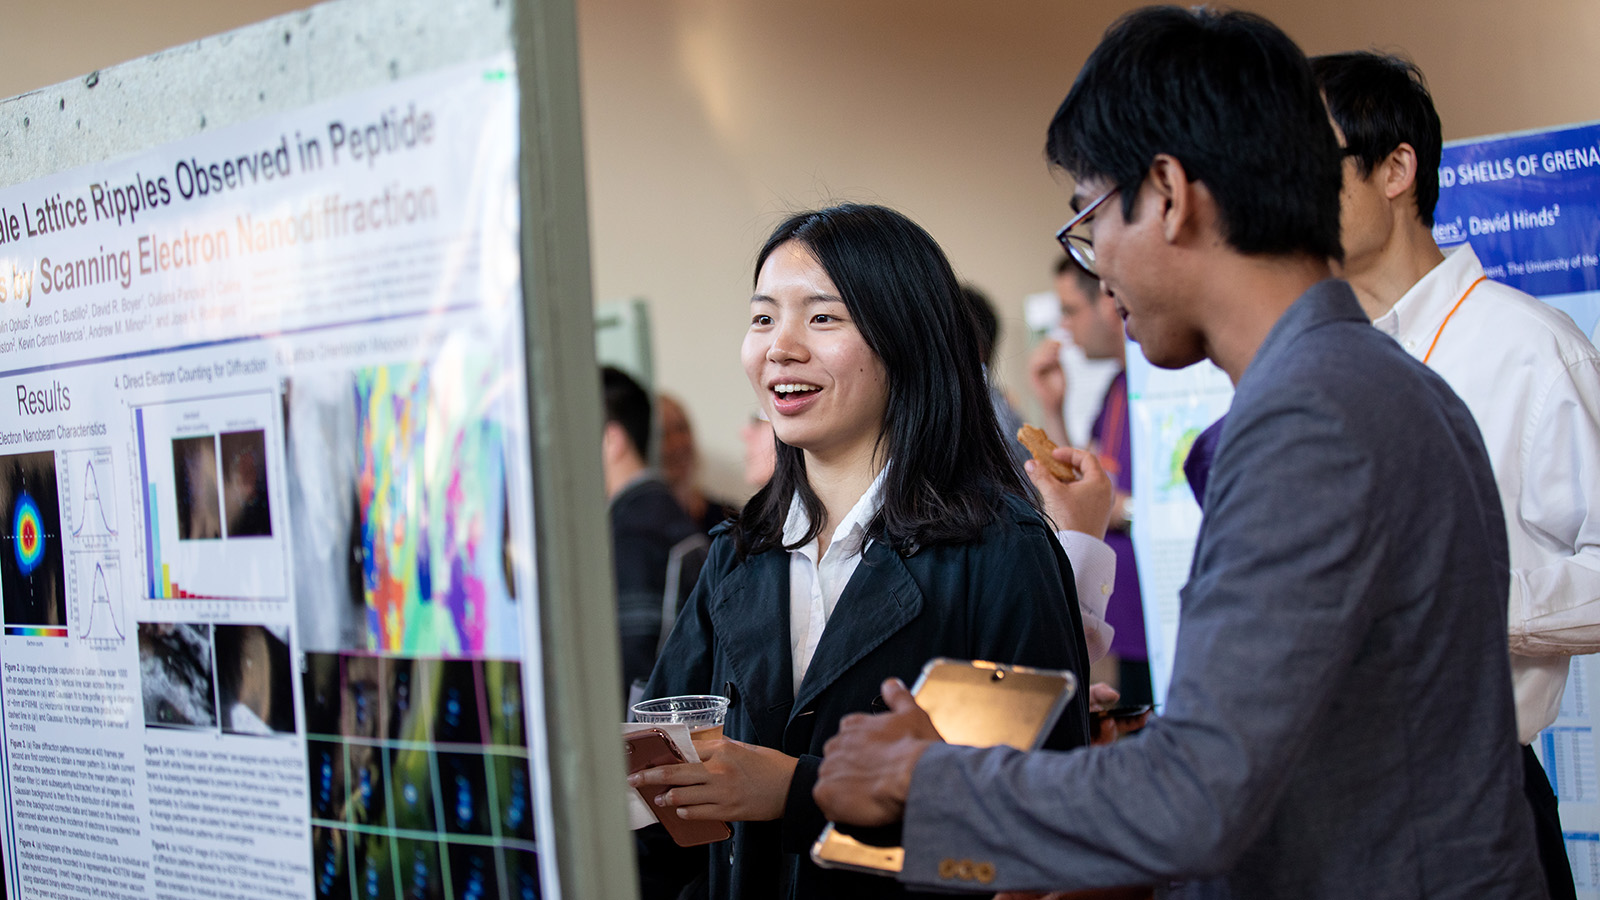 Graduate students discuss research at conference poster session